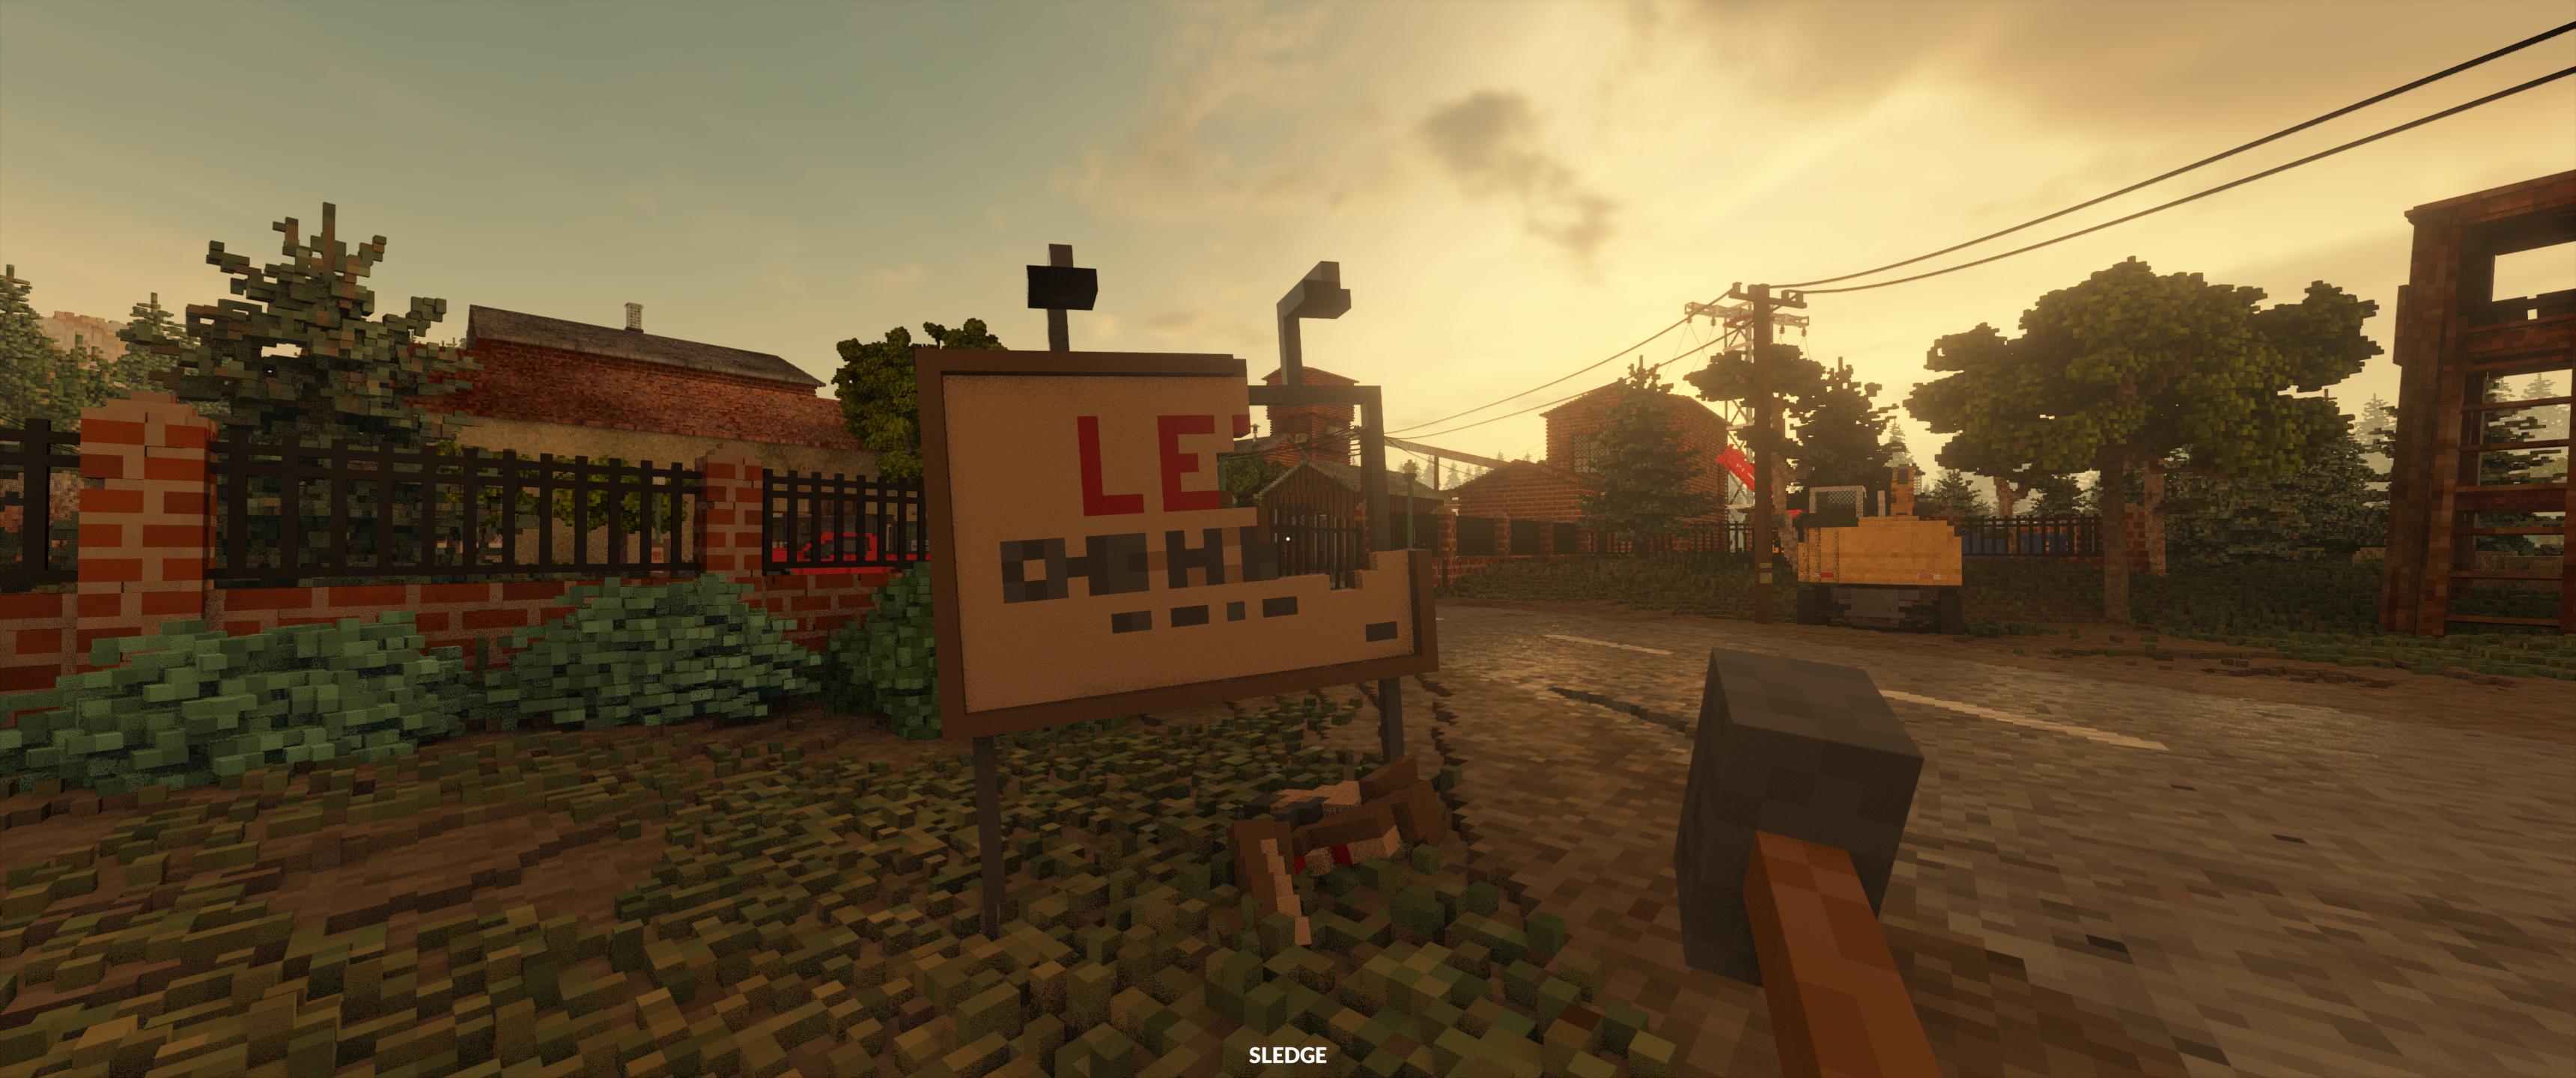 The final rendered scene from teardown featuring a broken sign, some background structures, telephone wires, trees and a digger